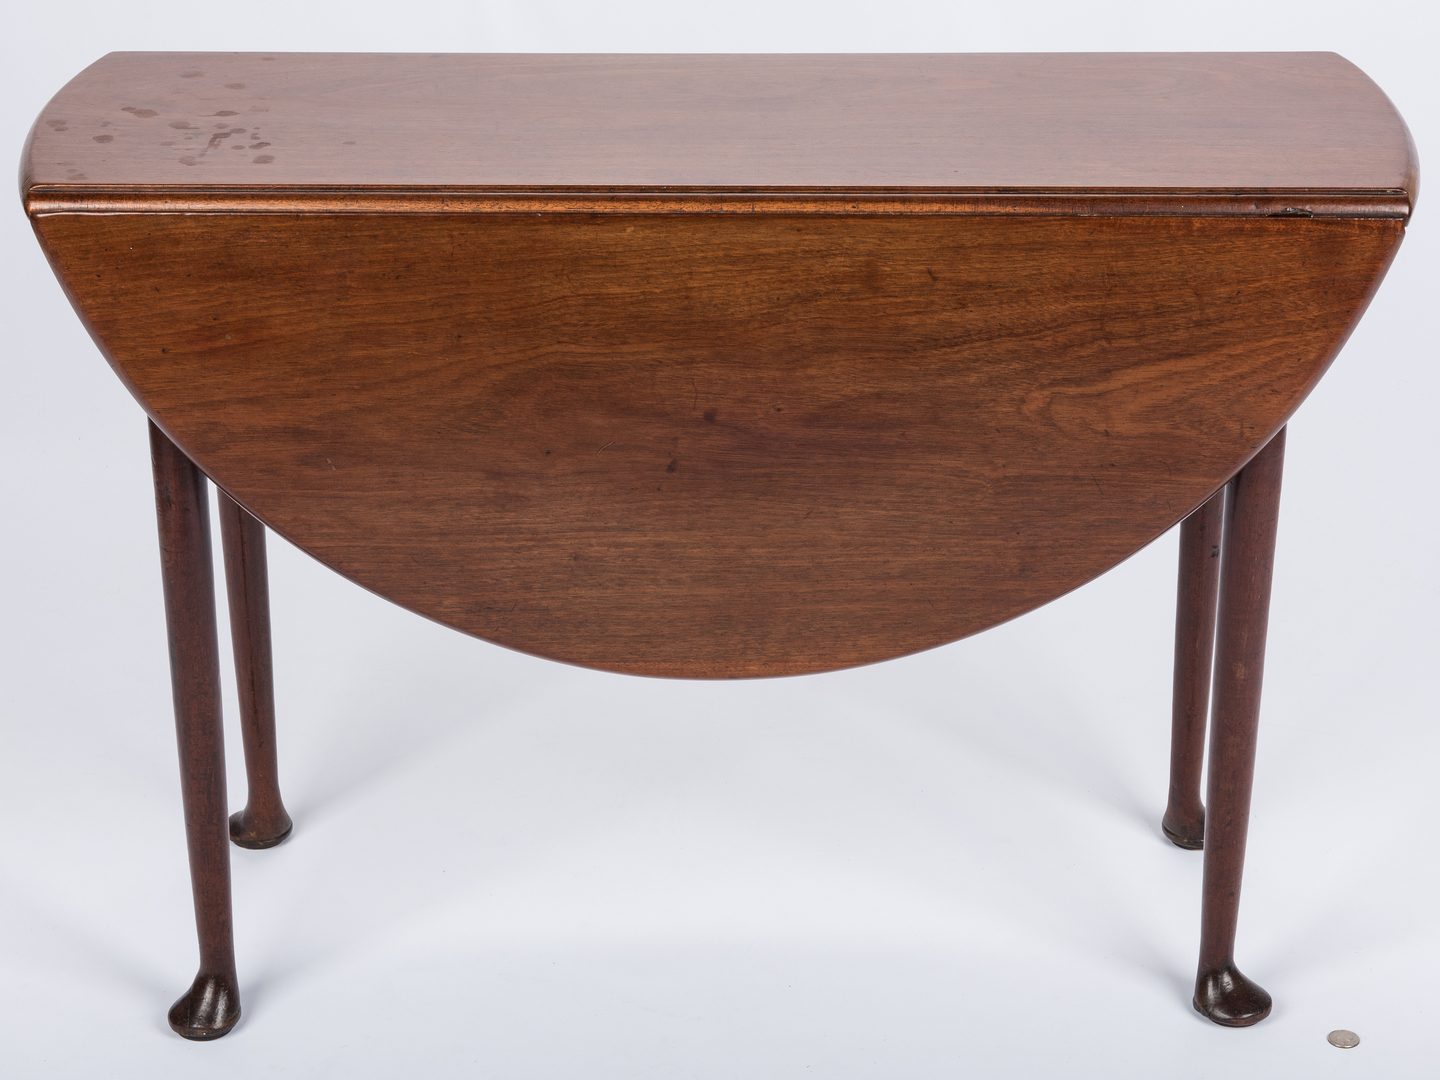 Lot 647: Diminutive Queen Anne Dropleaf Table